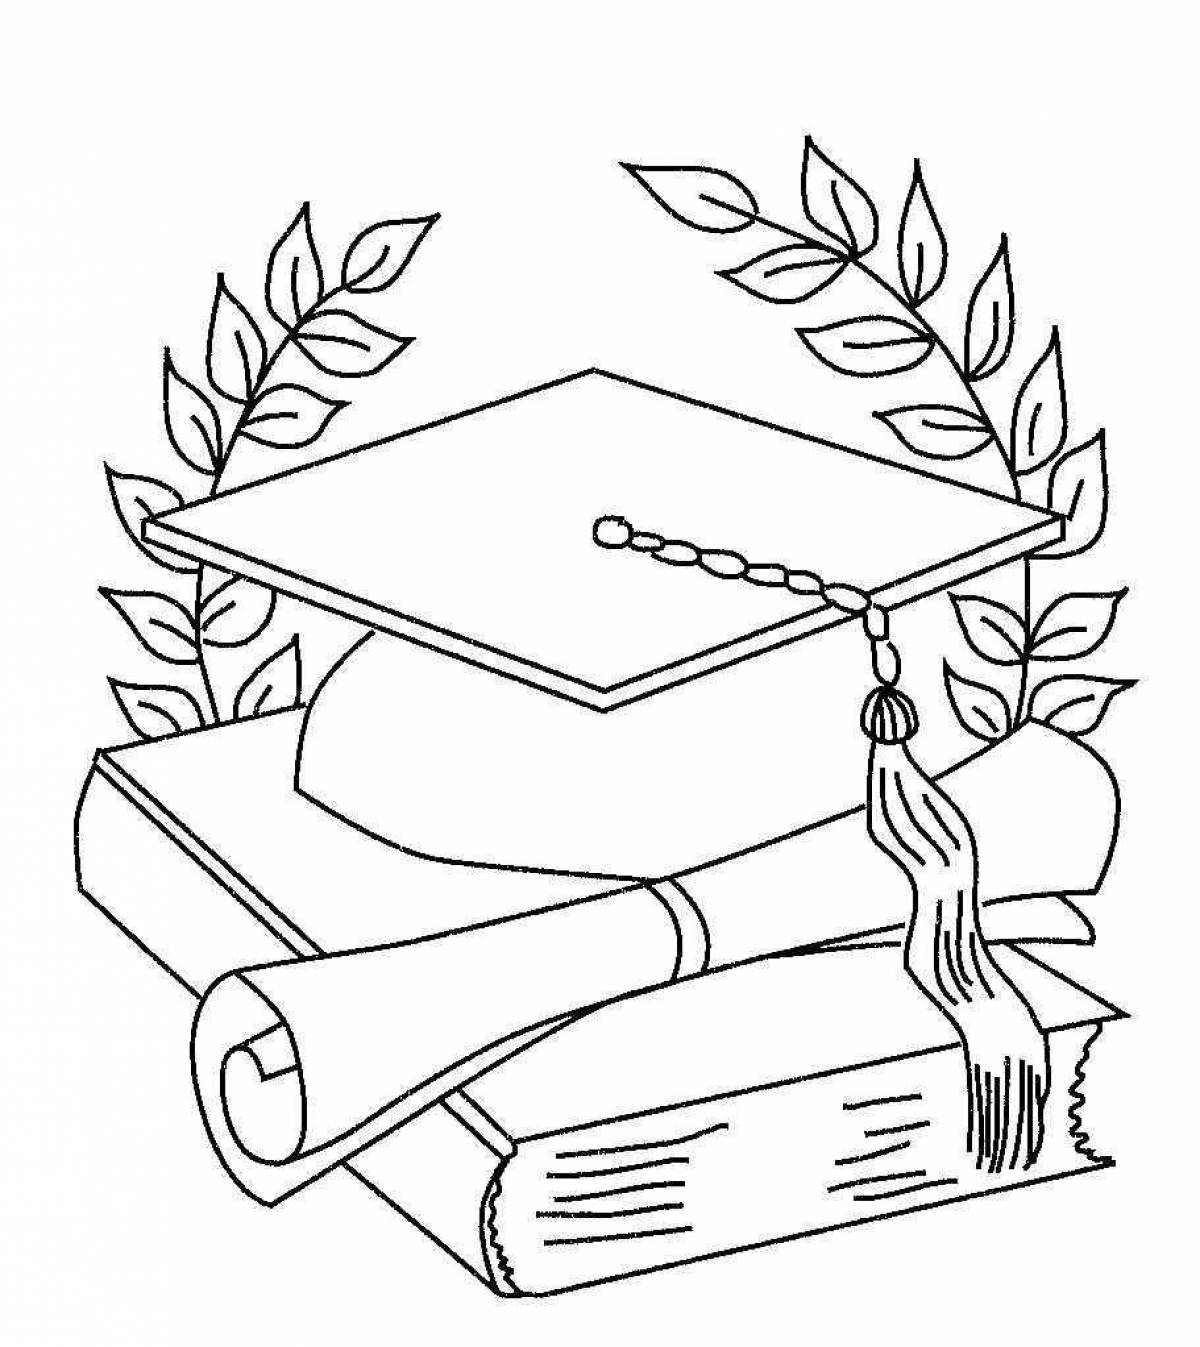 Glorious student day coloring page